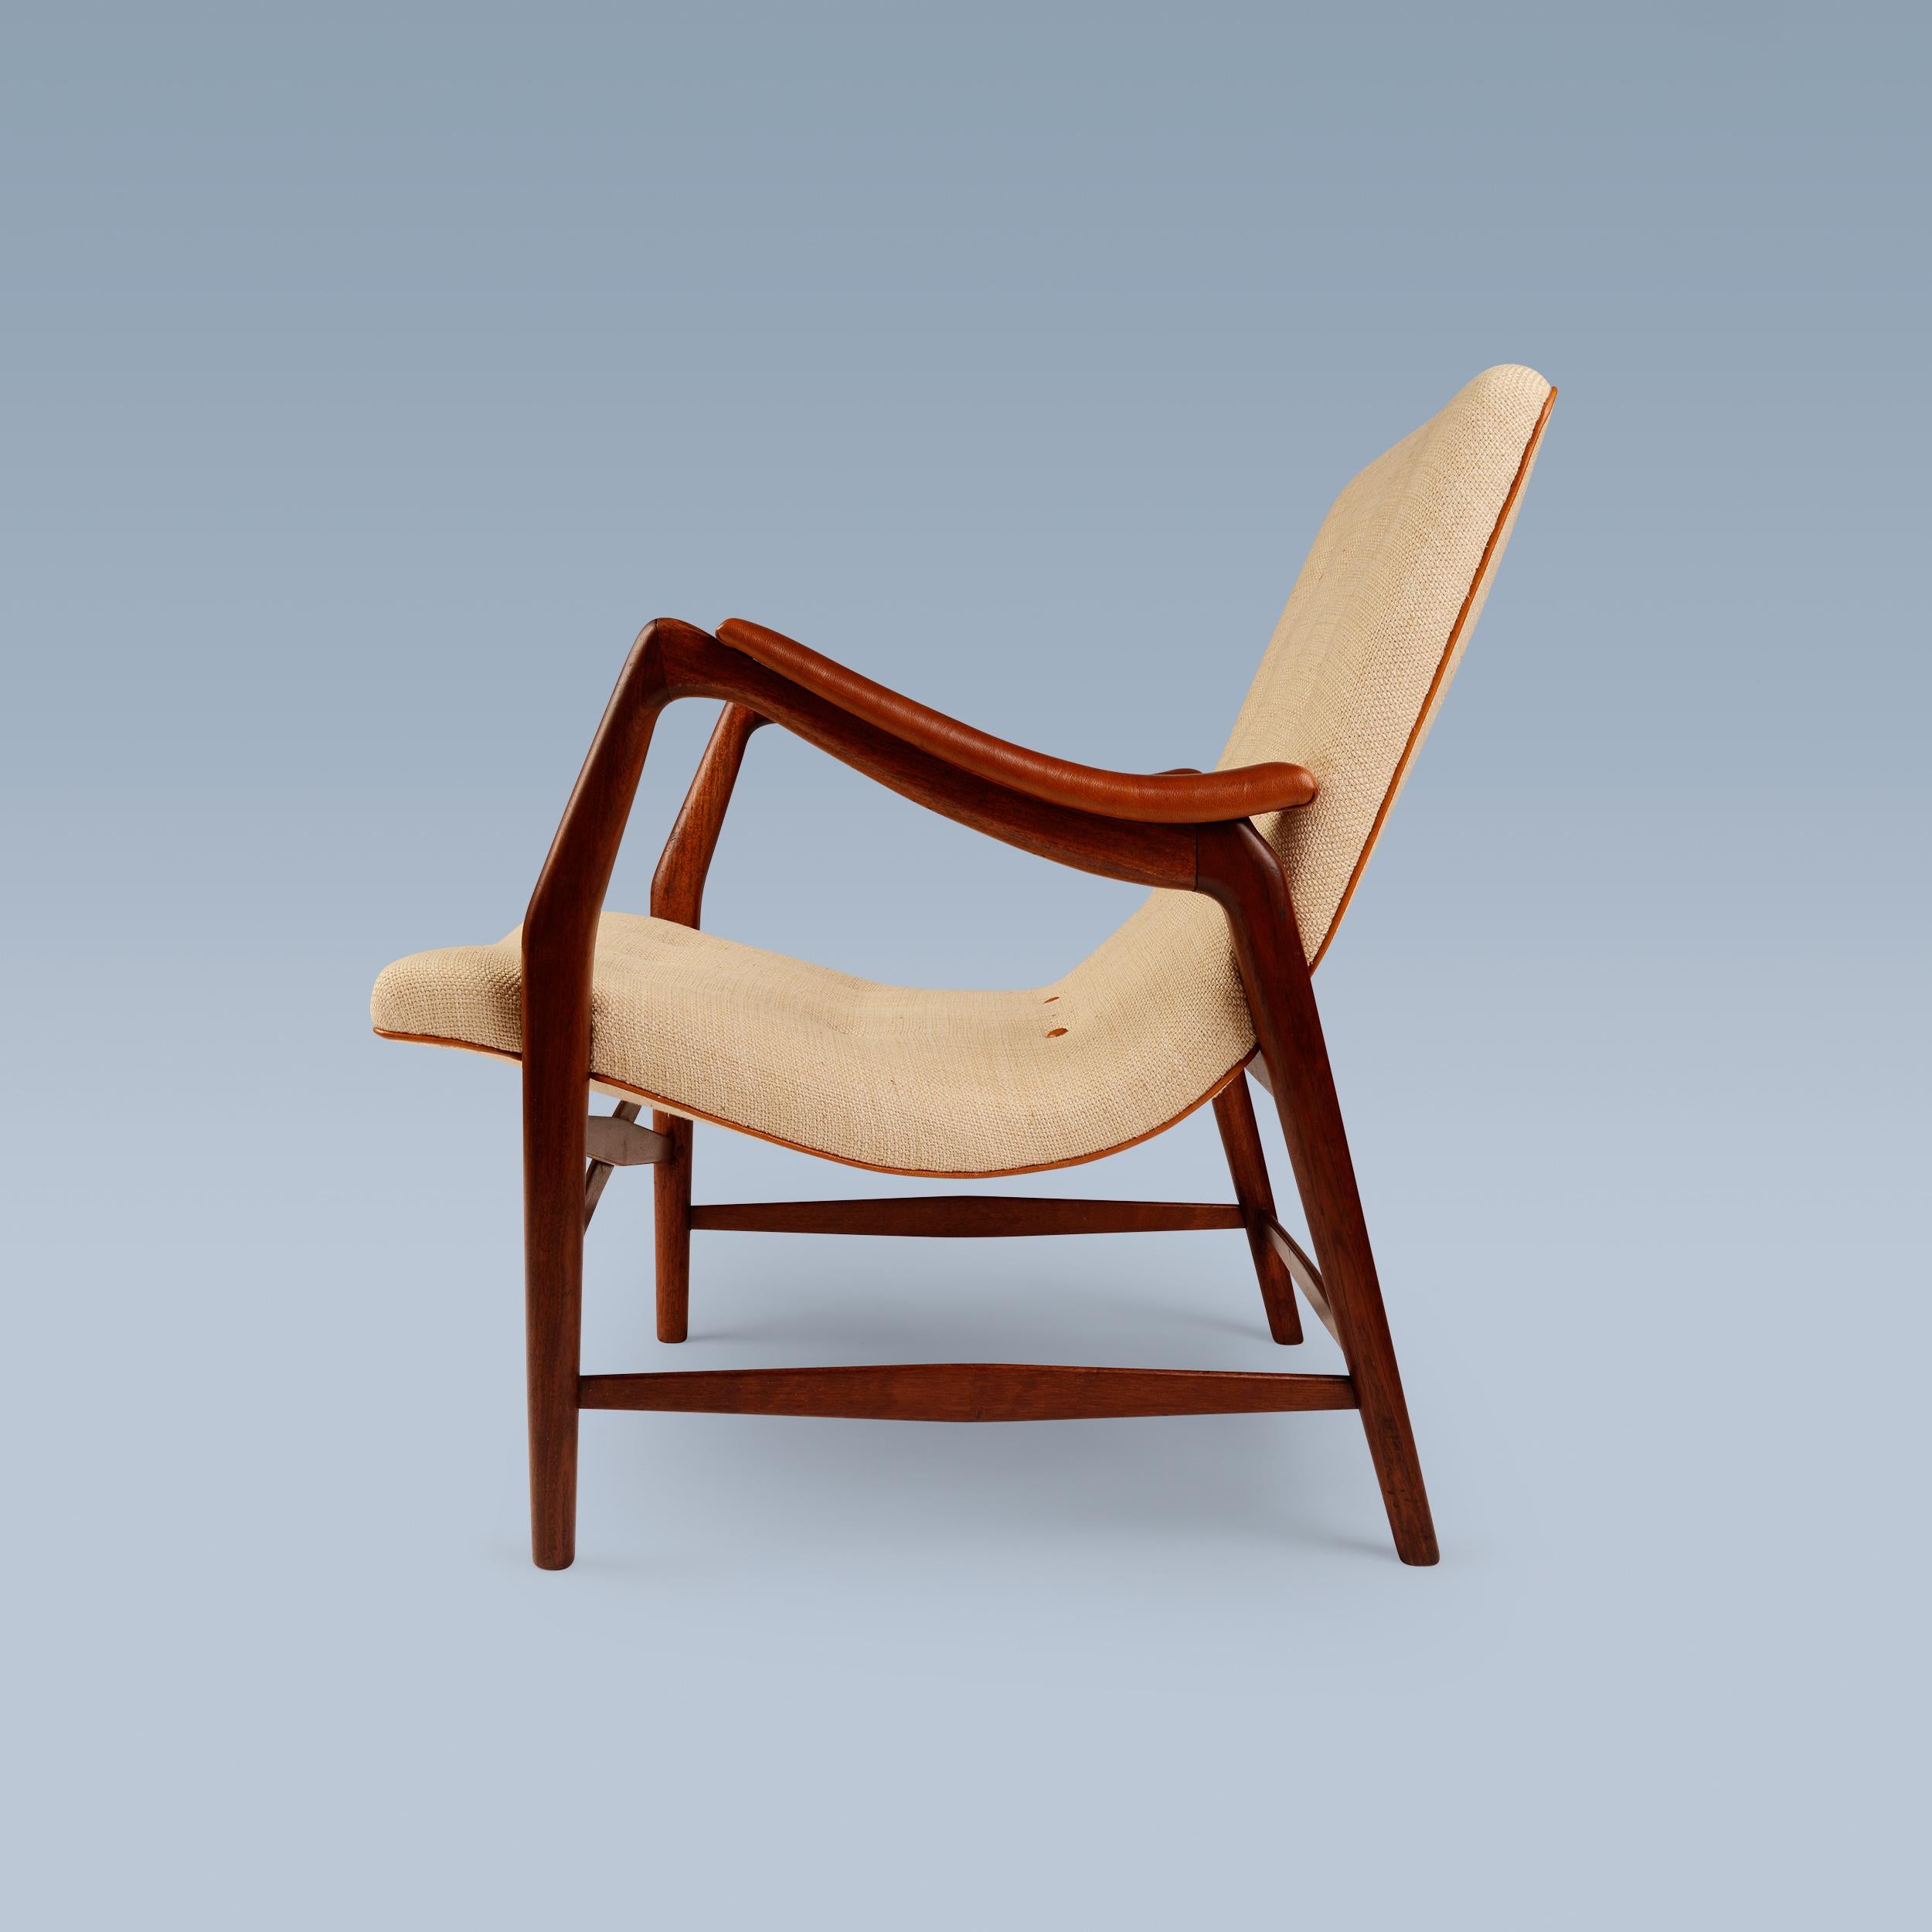 Scandinavian Modern Teak chair with curvy seat upholstered with light fabric and leather details For Sale